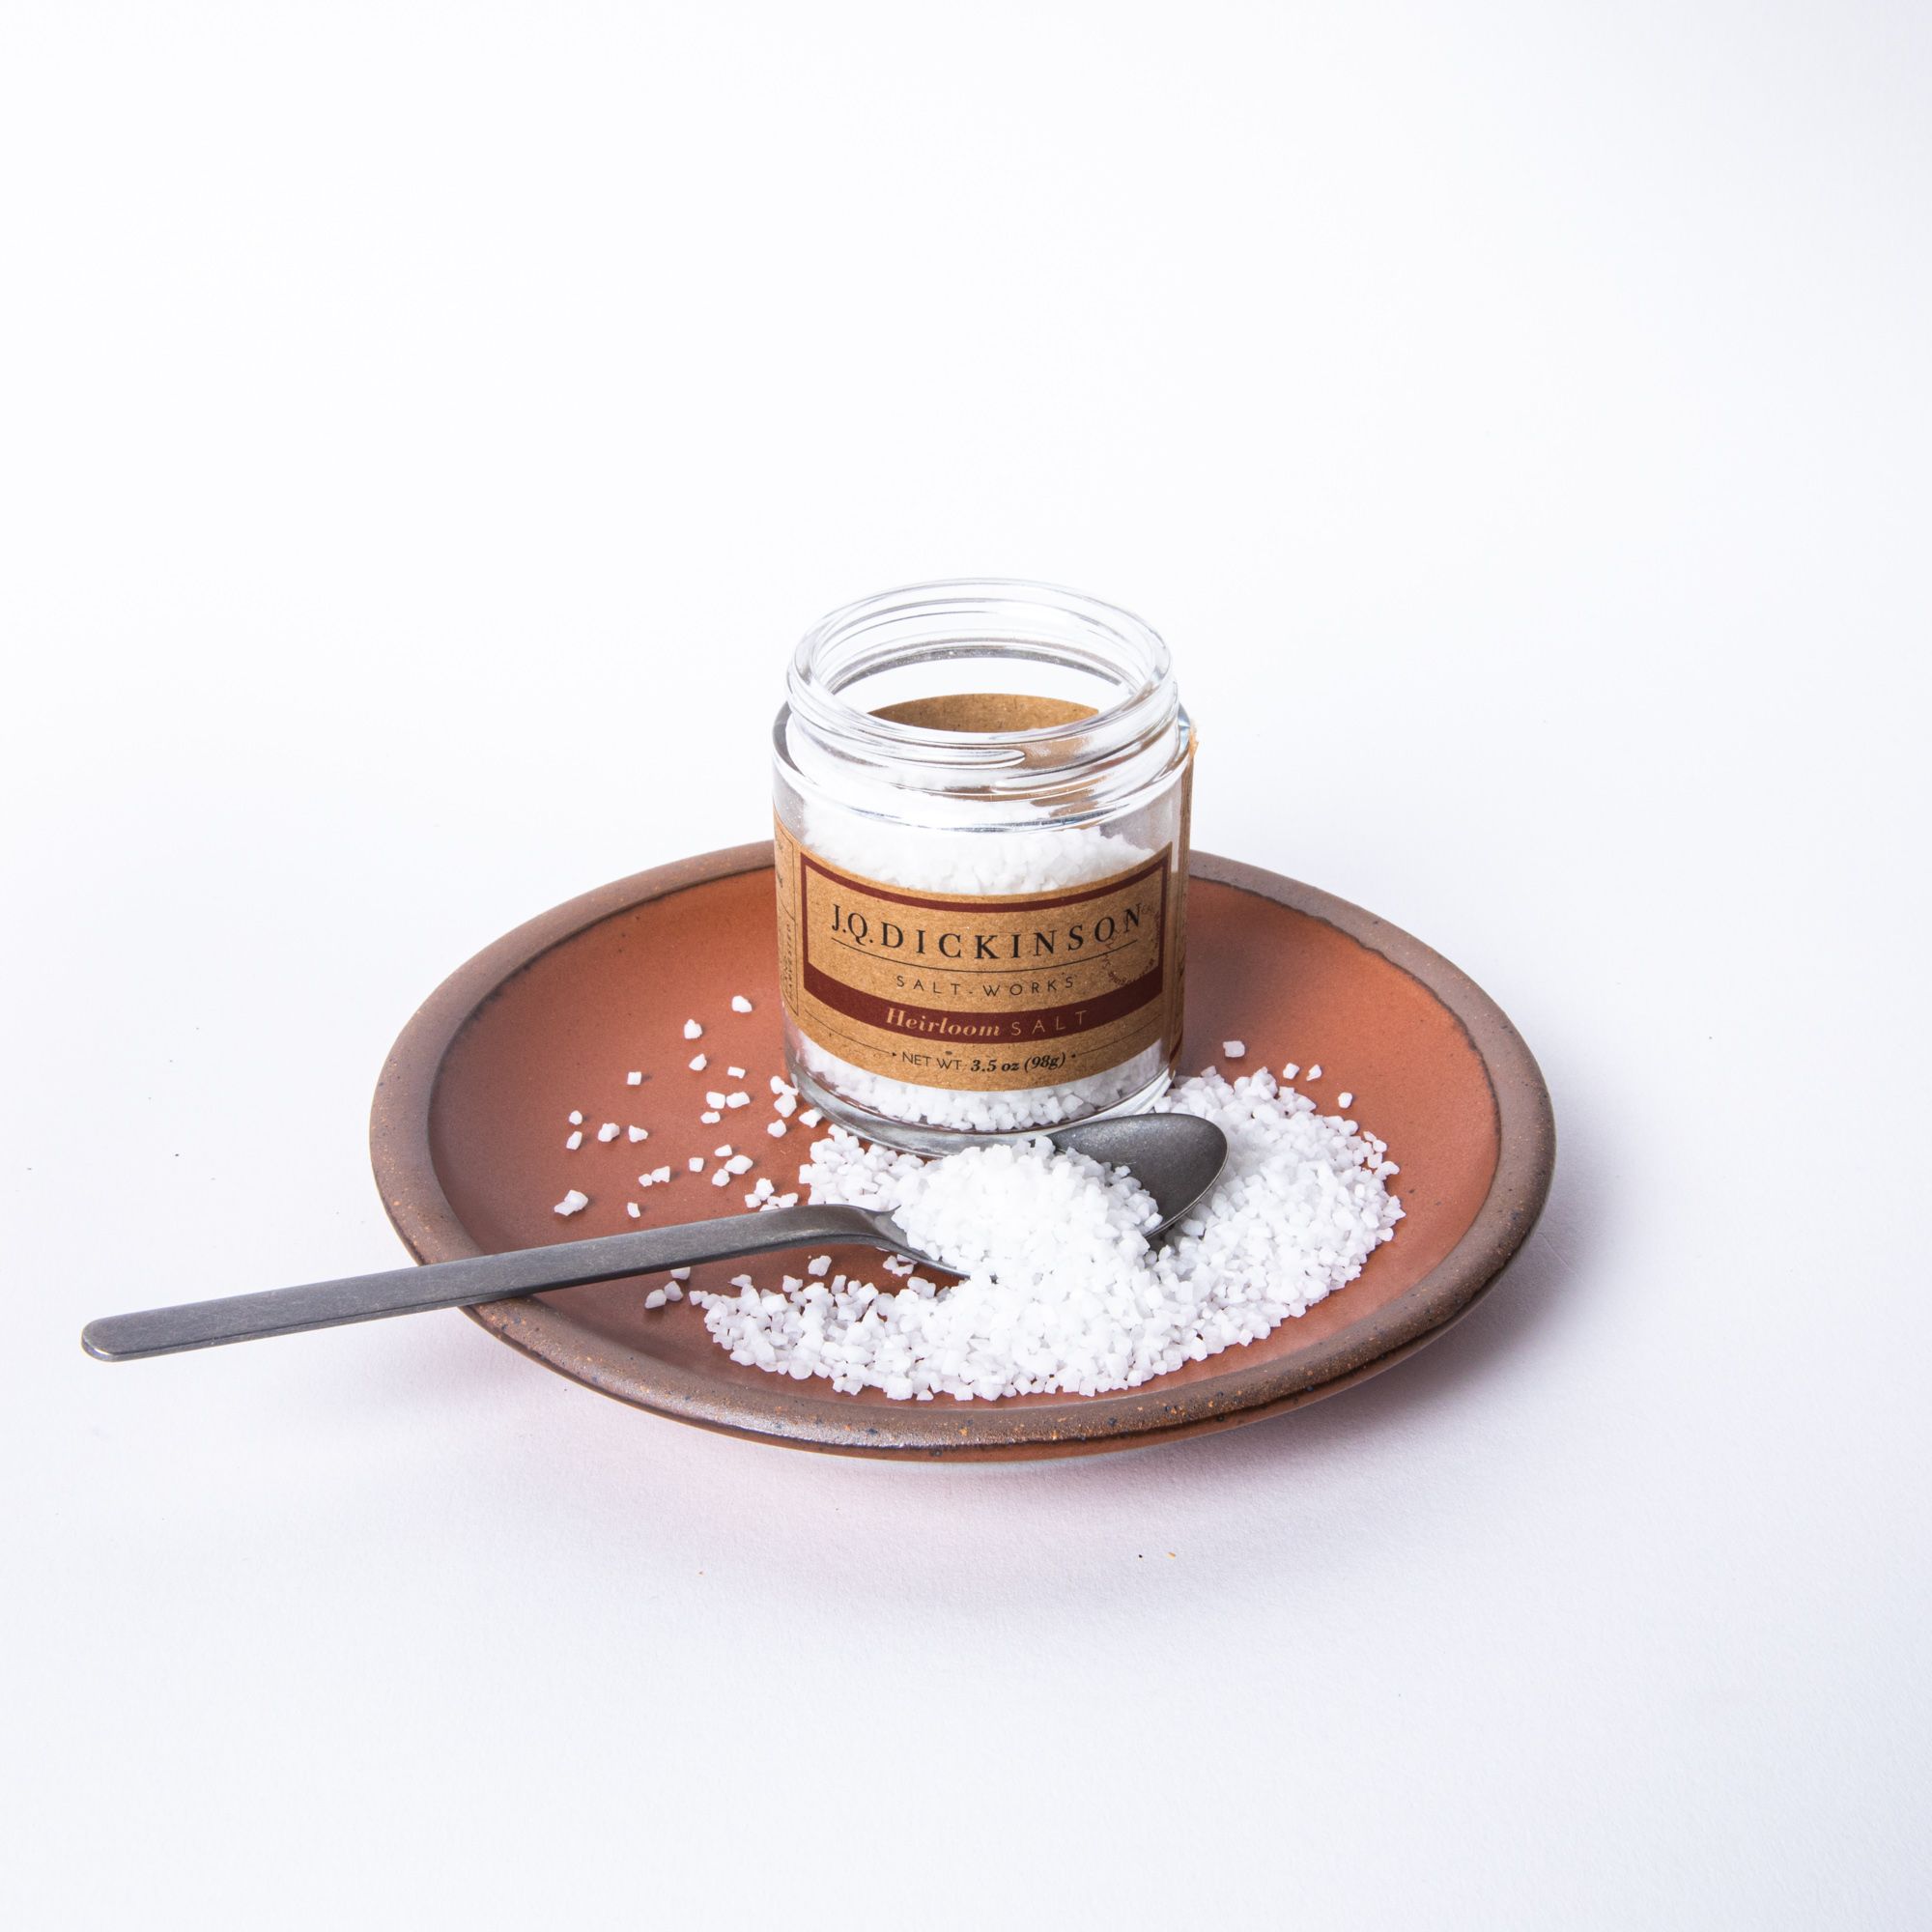 A short open jar filled with salt with a kraft brown label. The jar sits on a plate with salt and a spoon